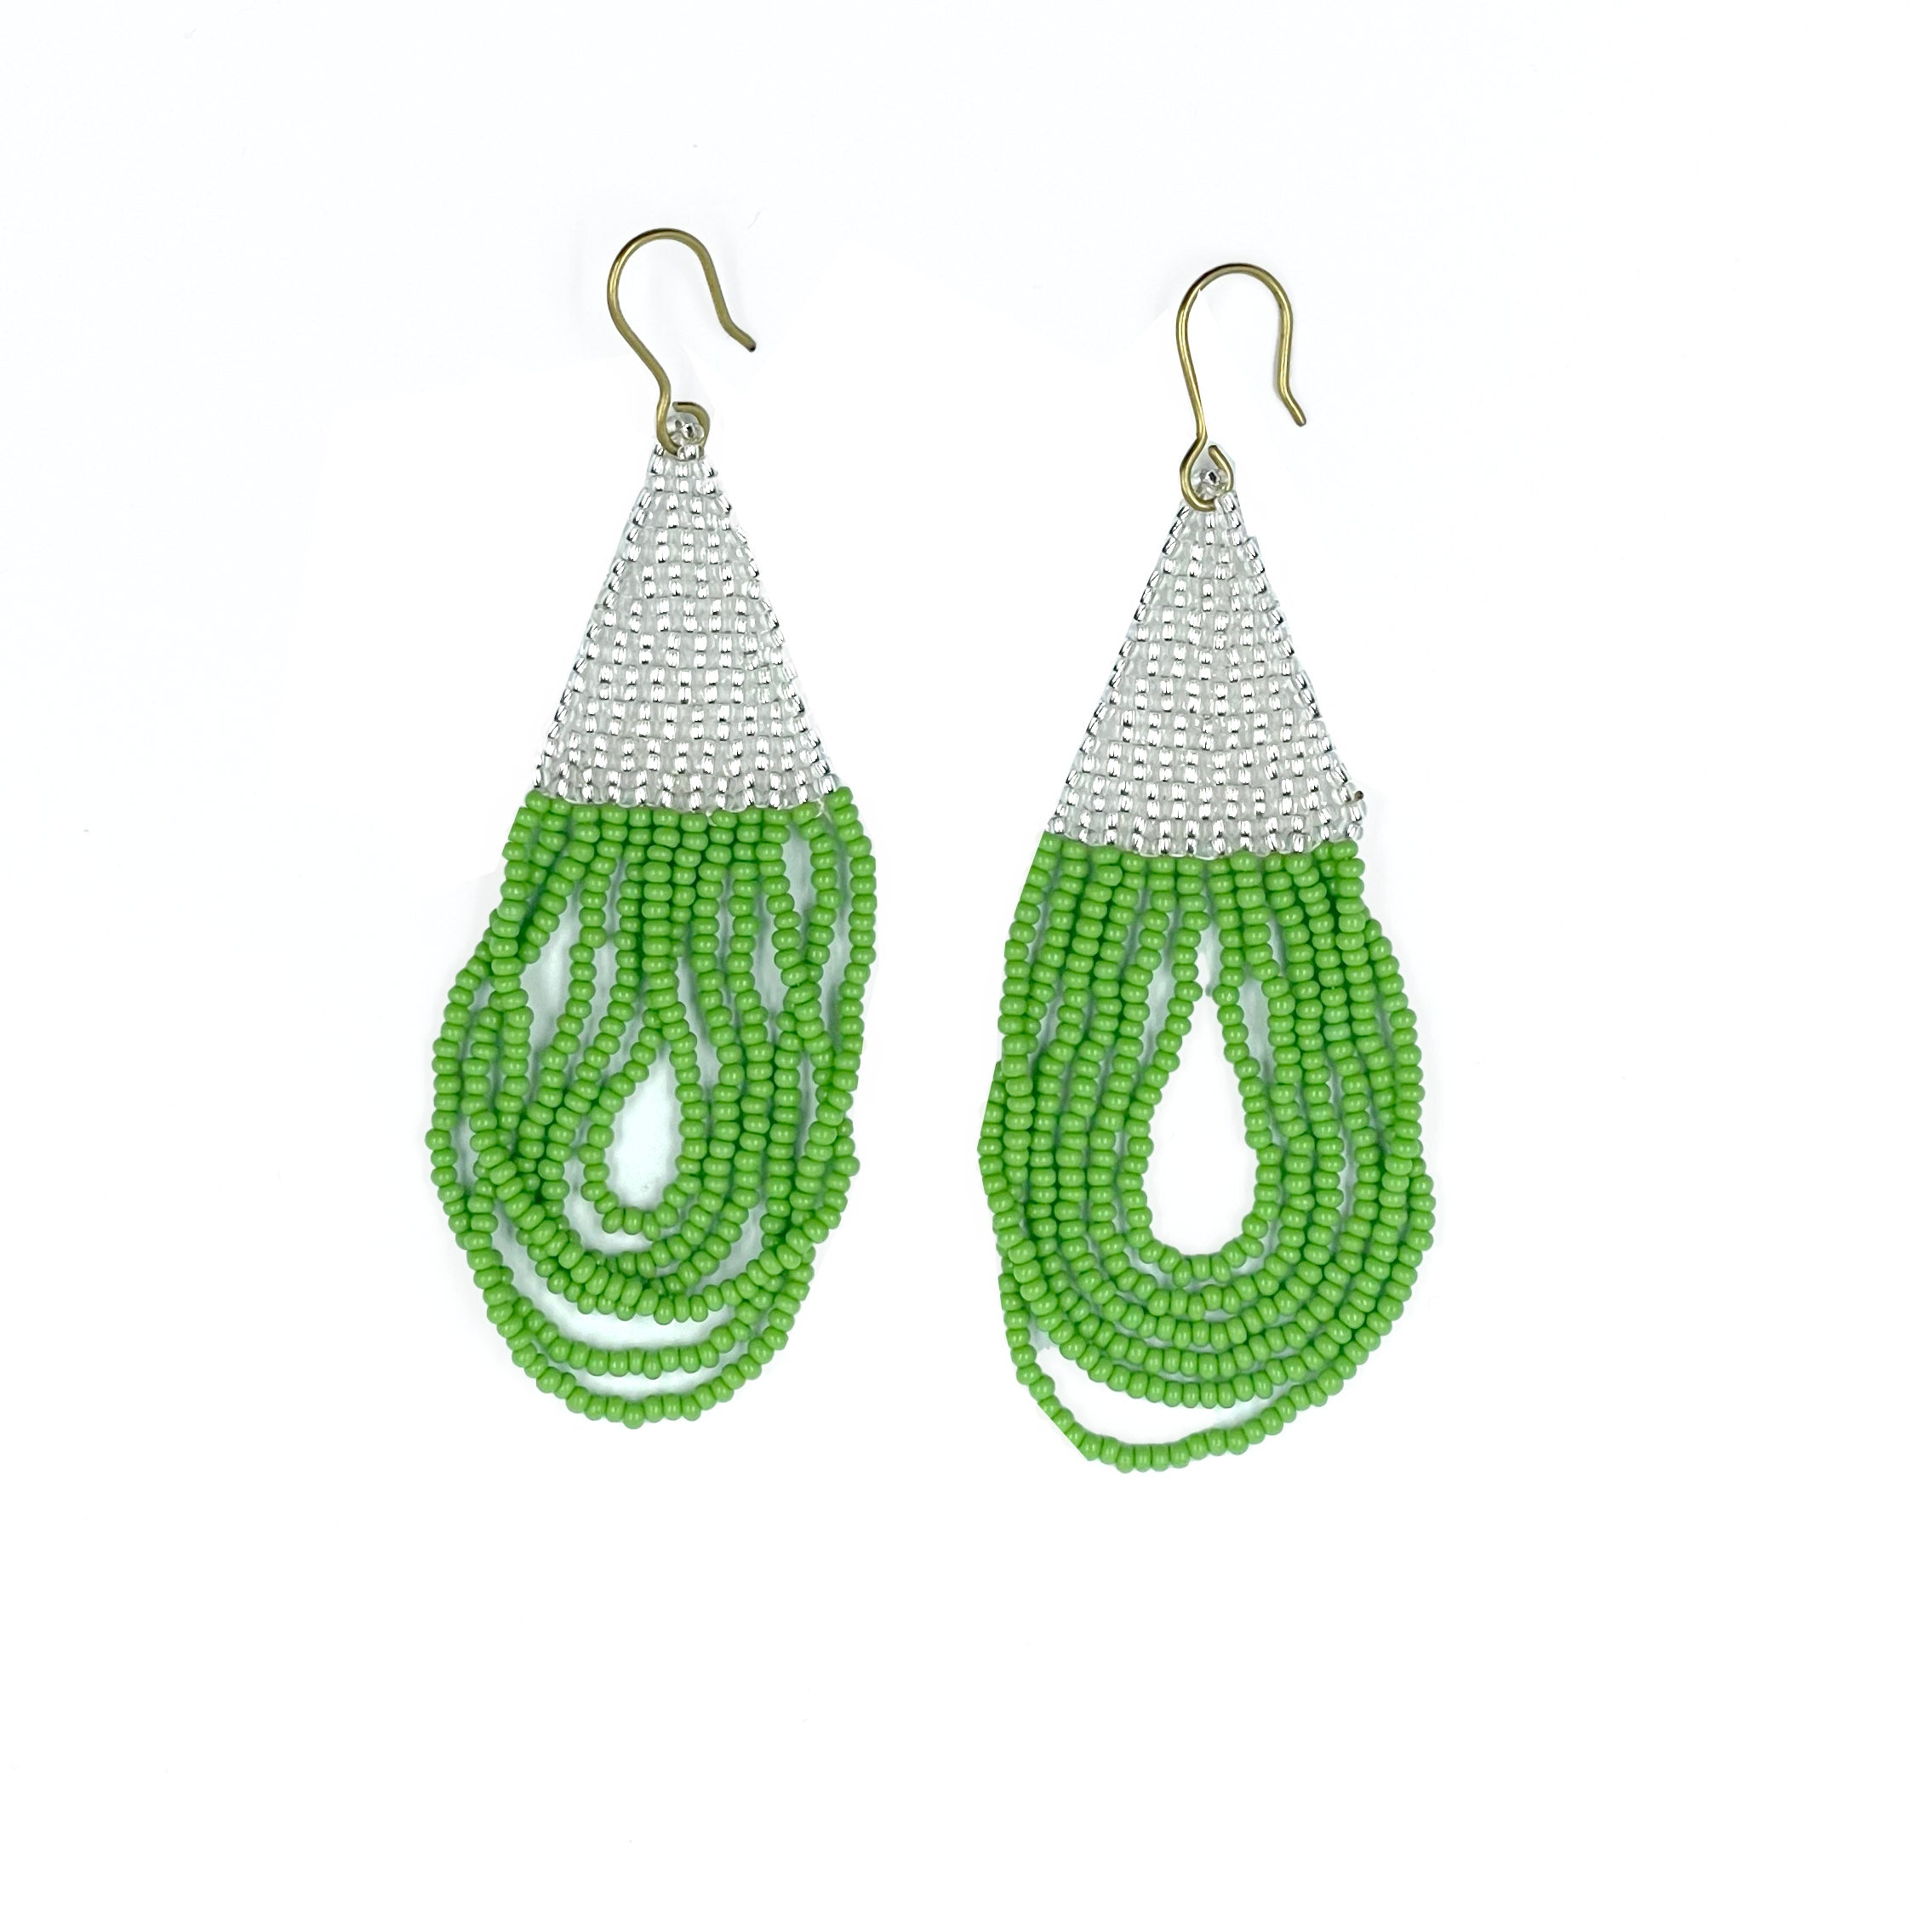 The refined shape and airy feel of these stunning beaded earrings make them easy to wear no matter where life takes you. Add beautiful color to any outfit.